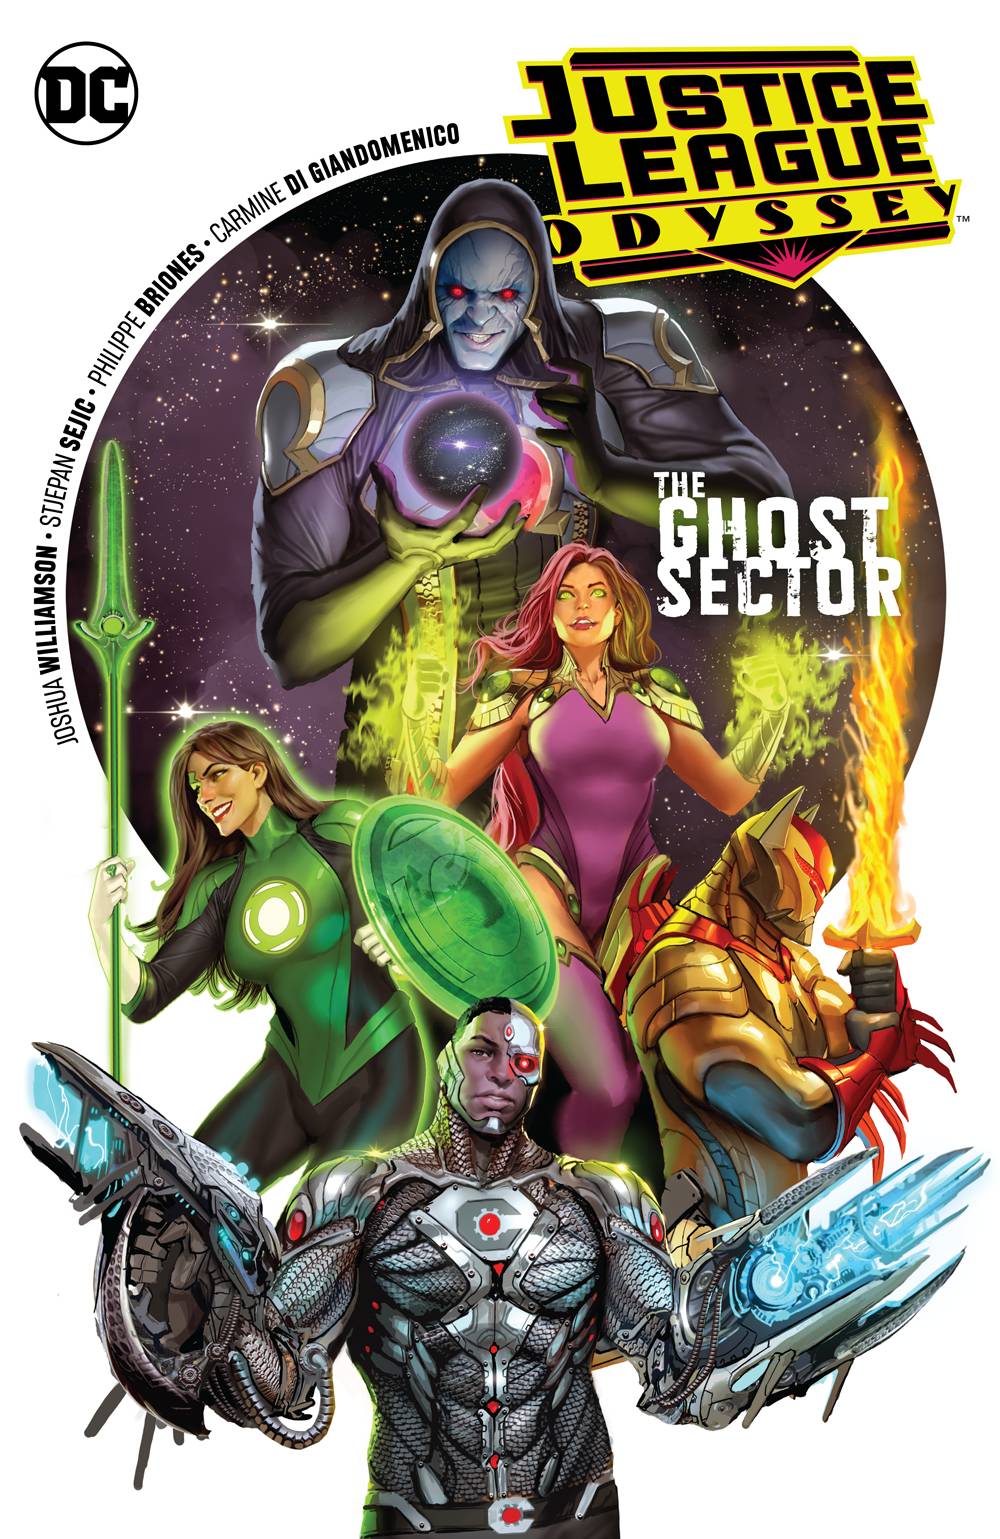 JUSTICE LEAGUE ODYSSEY TP VOL 01 THE GHOST SECTOR